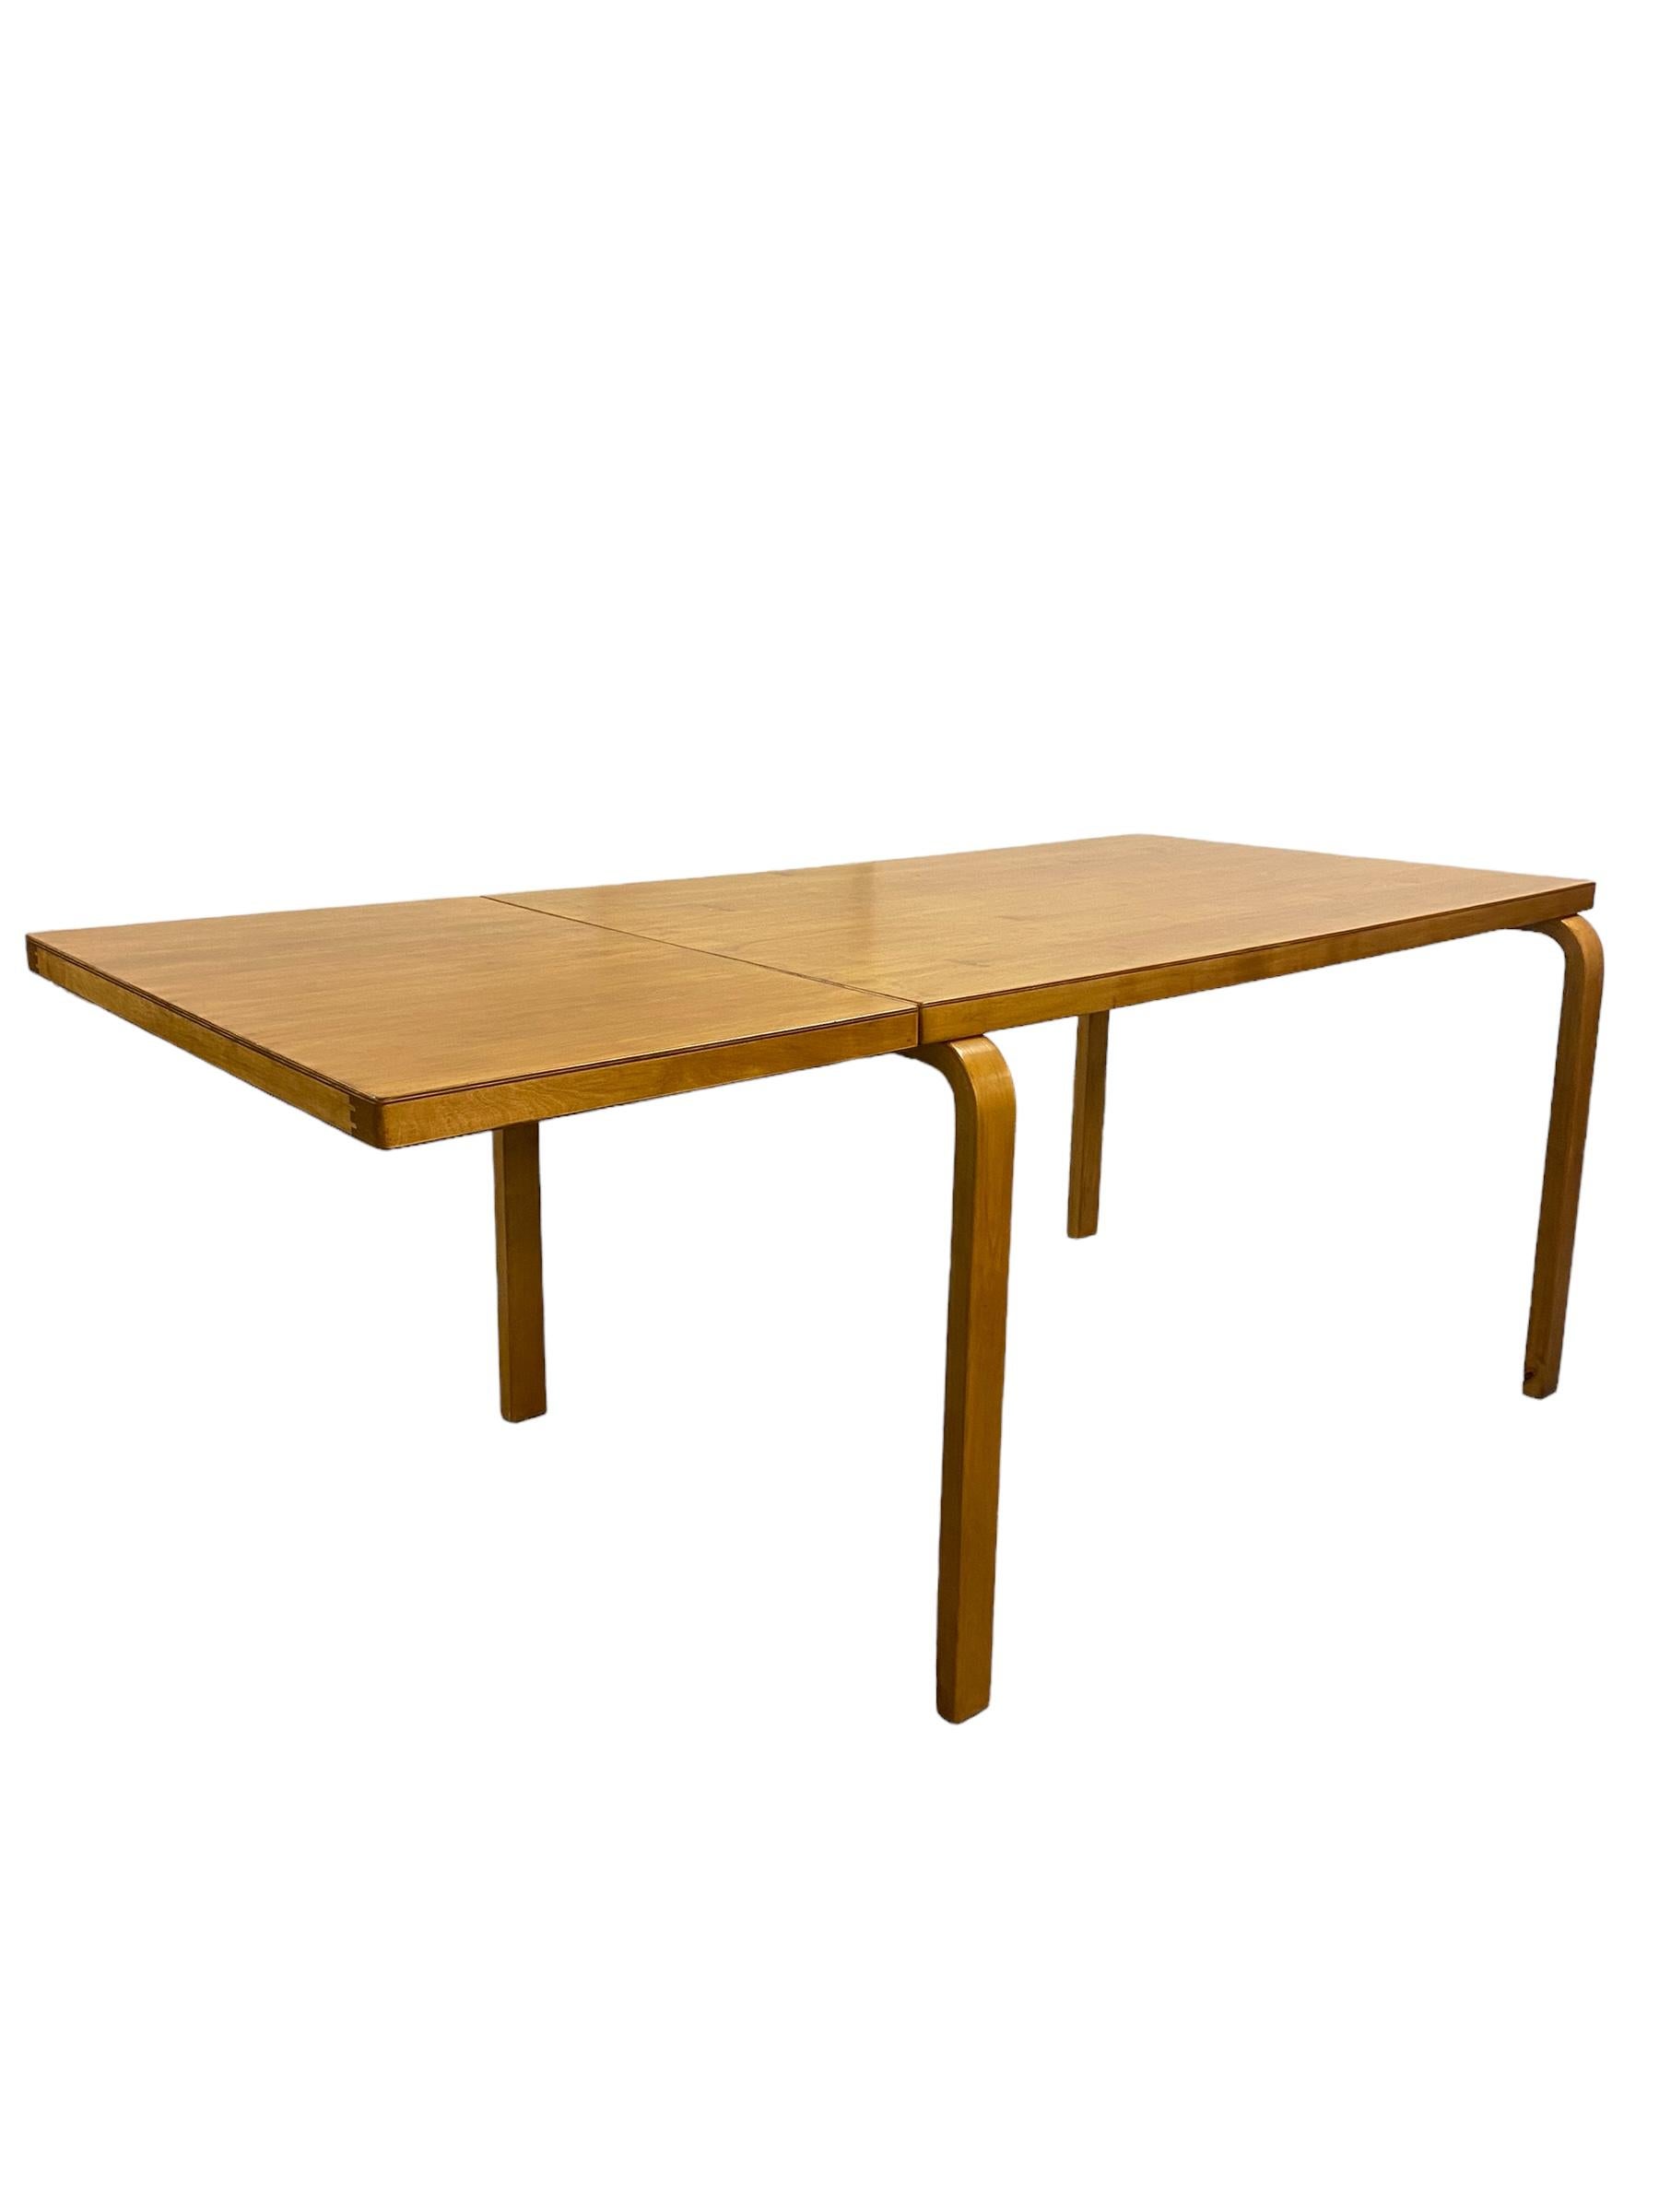 A foldable table in birch with beautiful patina, designed by Alvar Aalto and retailed by Artek in the 1950s. Grown beautiful with age and use for over 70 years, the patina is exactly what makes this piece so unique. The table has a foldable